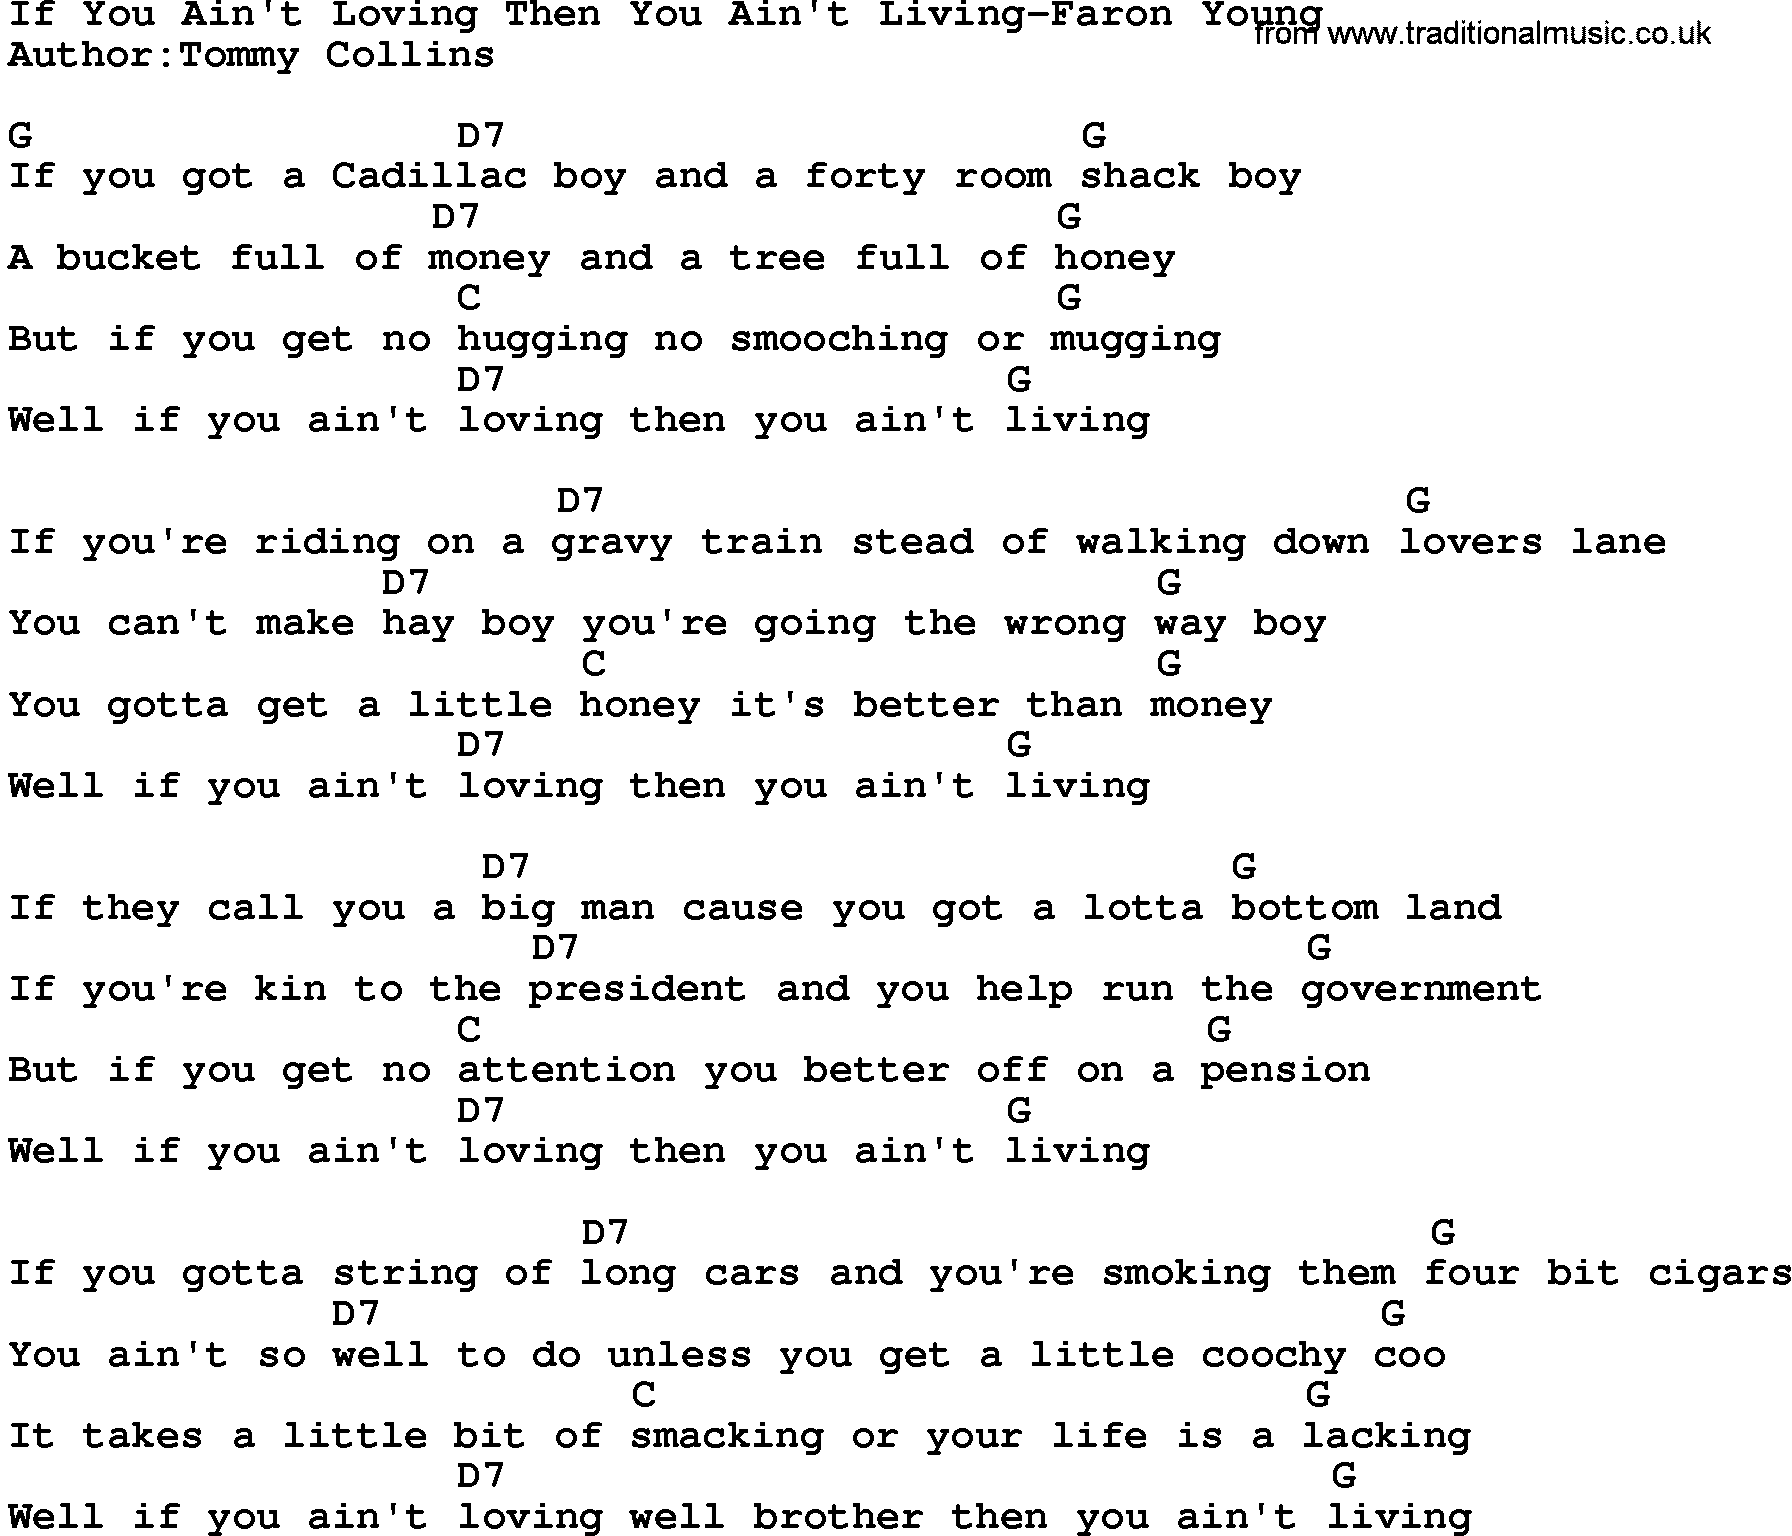 Country music song: If You Ain't Loving Then You Ain't Living-Faron Young lyrics and chords